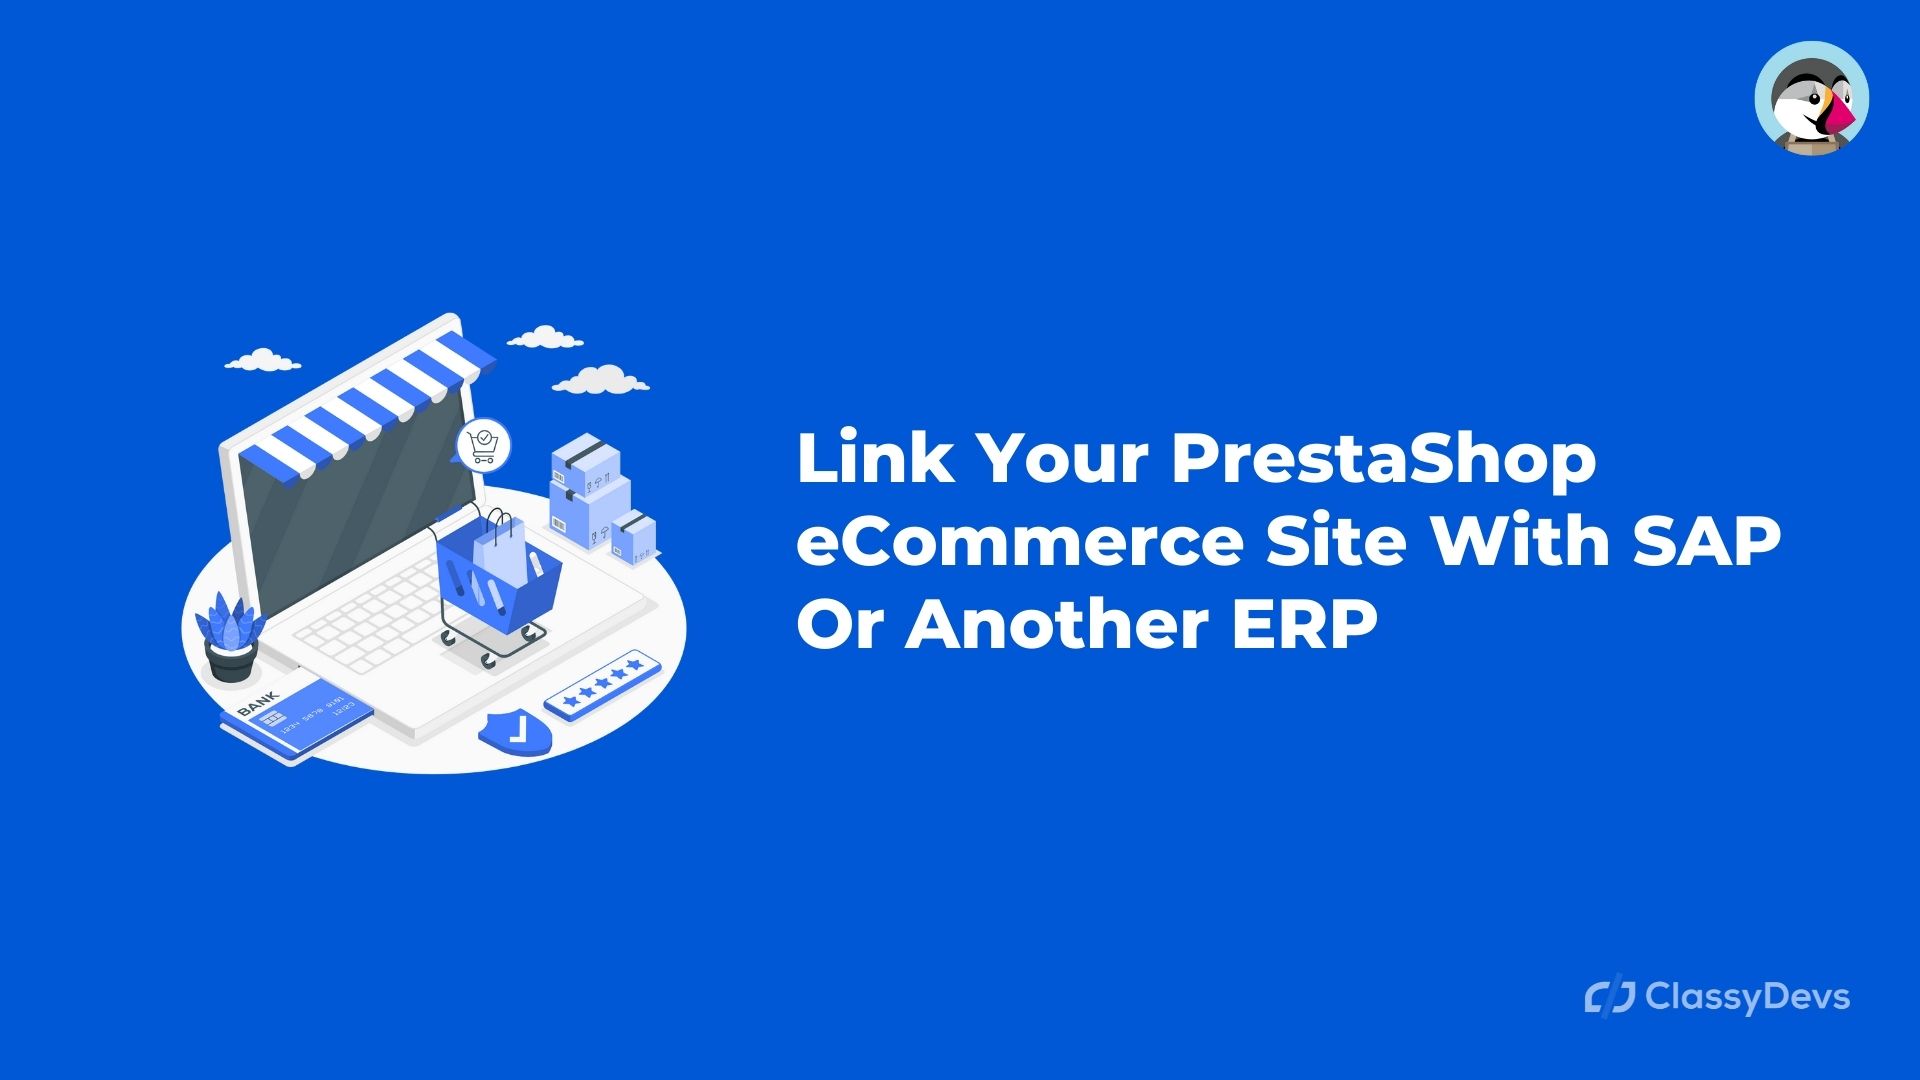 Link Your PrestaShop eCommerce Site With SAP Or Another ERP